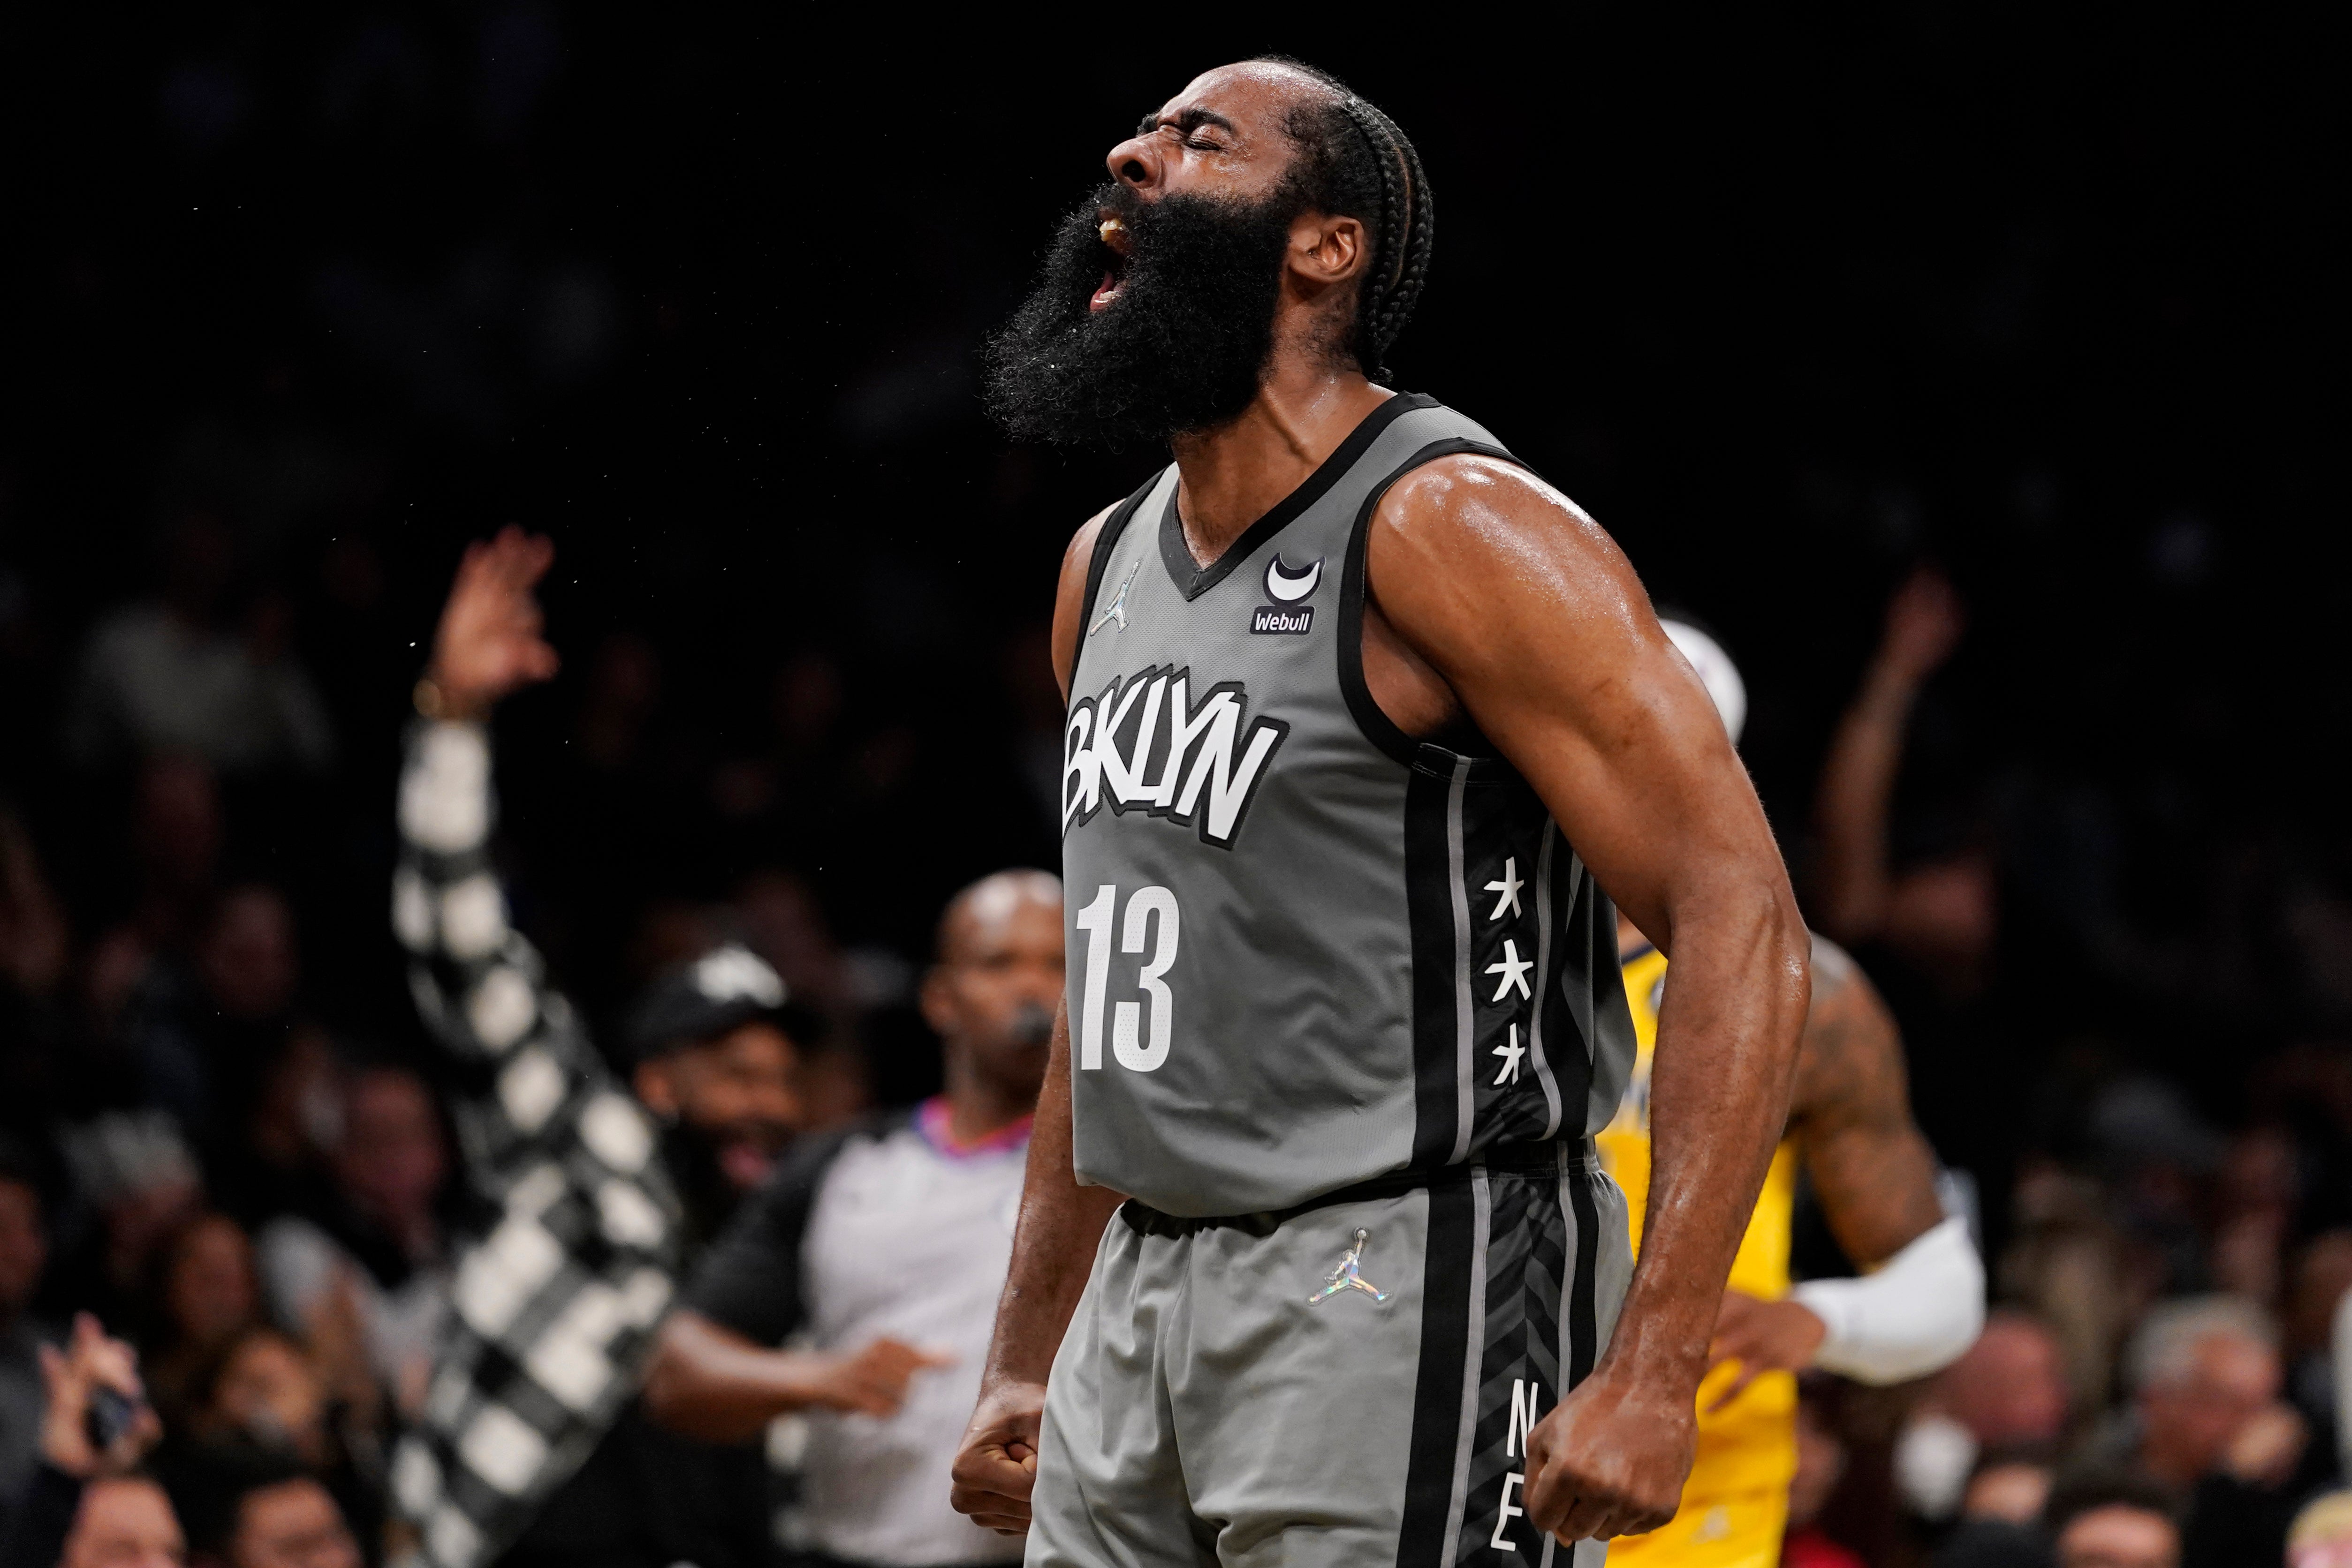 NBA: James Harden traded to the Brooklyn Nets